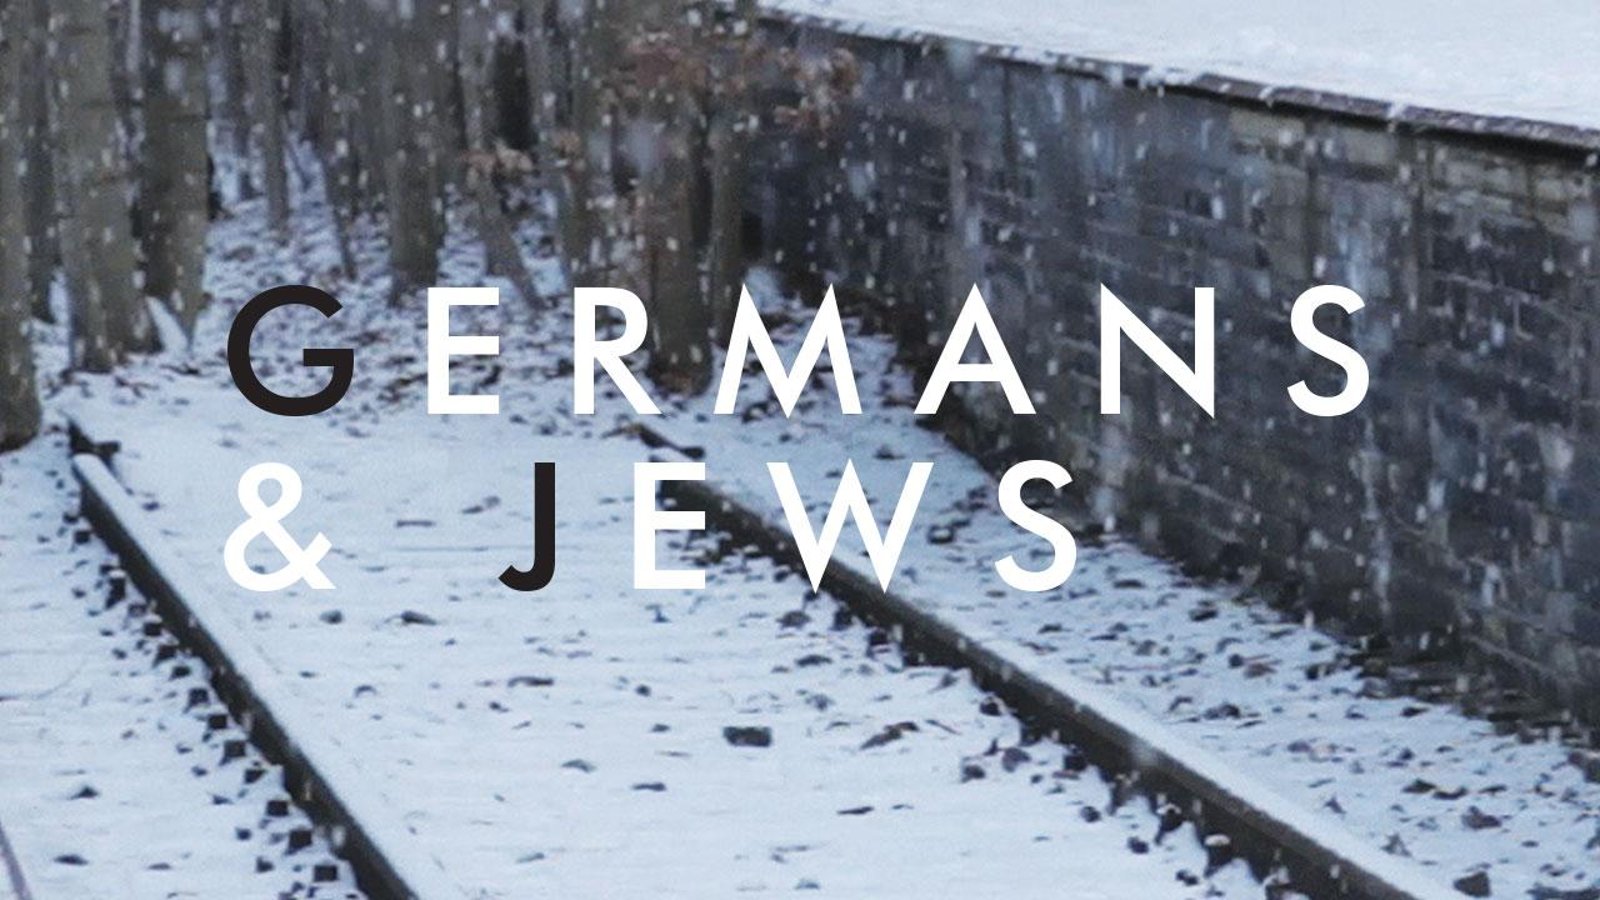 Germans and Jews